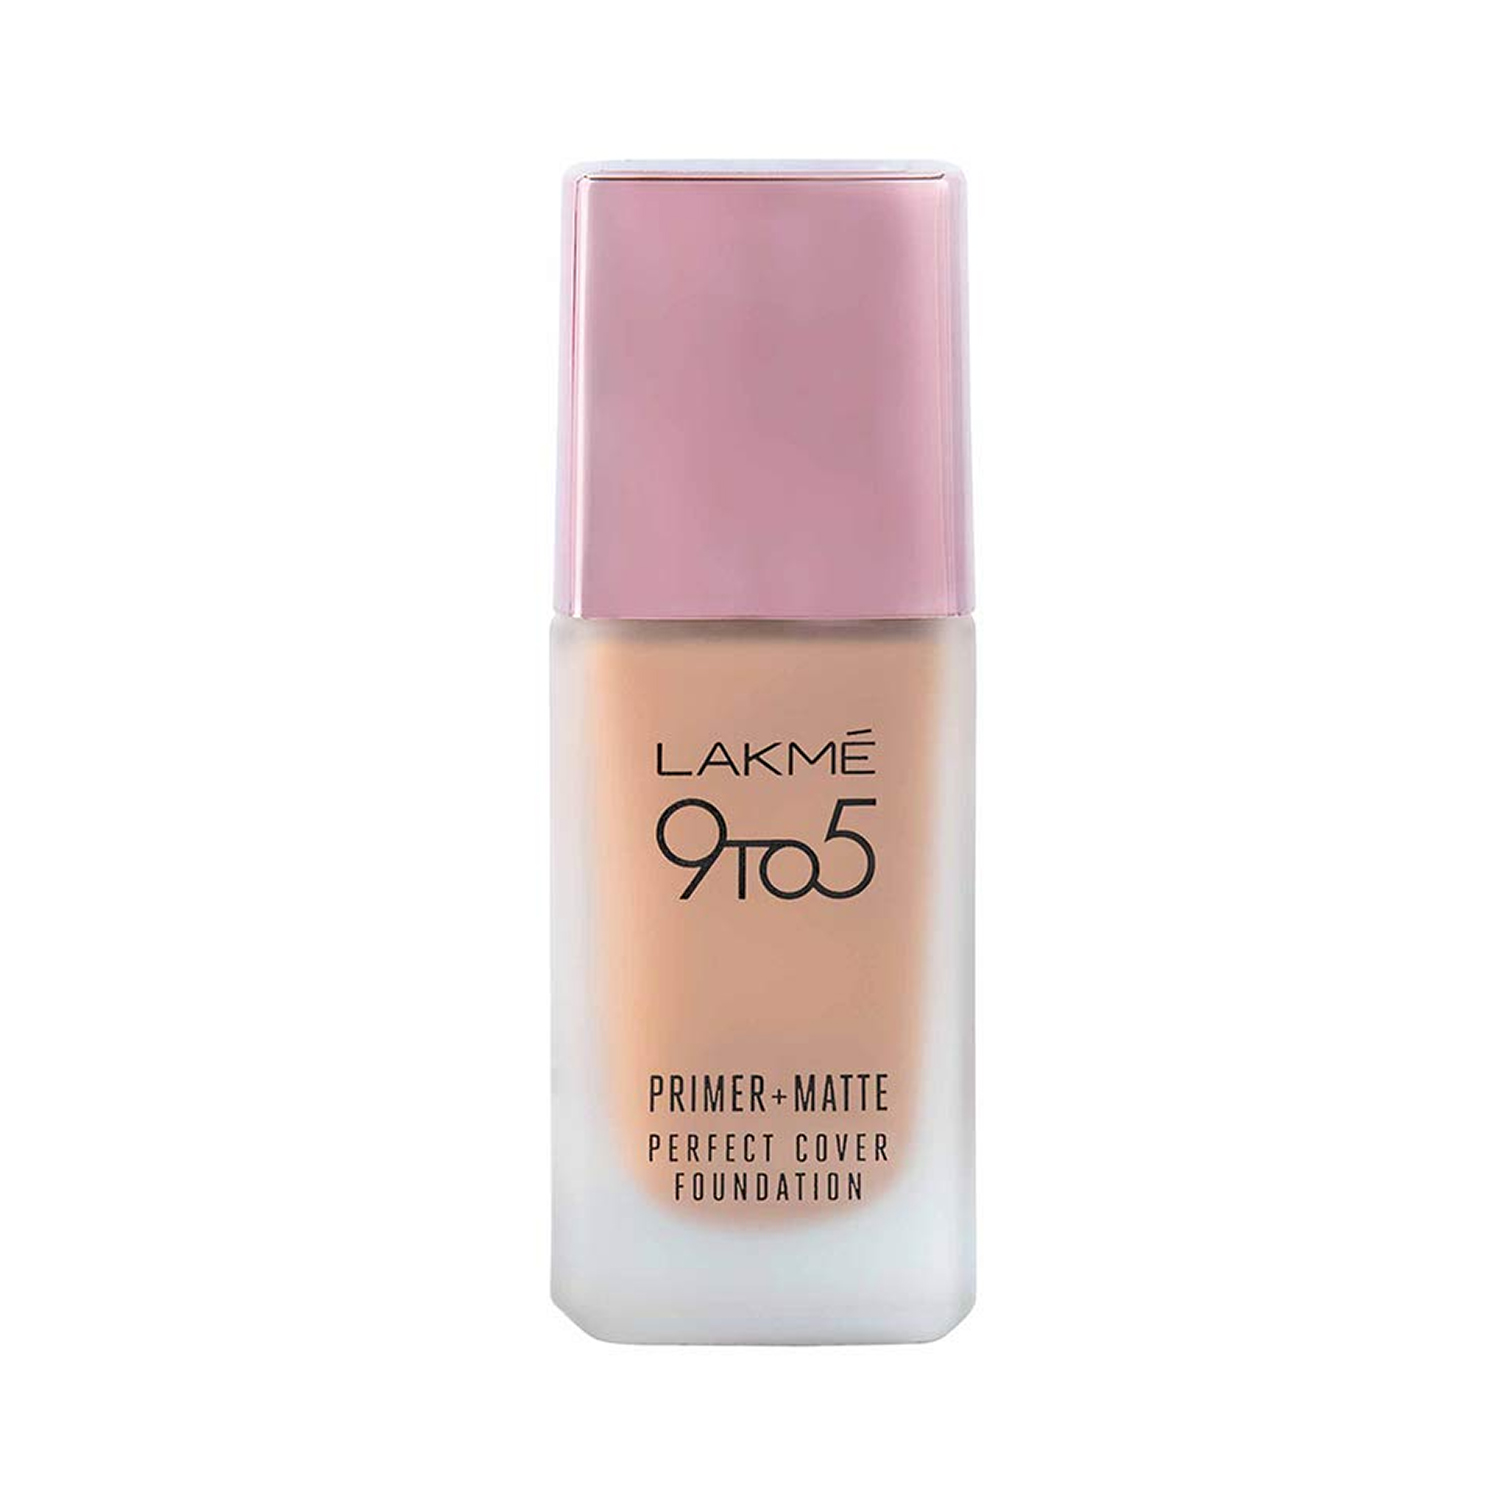 Lakme 9To5 Primer + Matte Perfect Cover Foundation, 25ml-C100 Cool Ivory